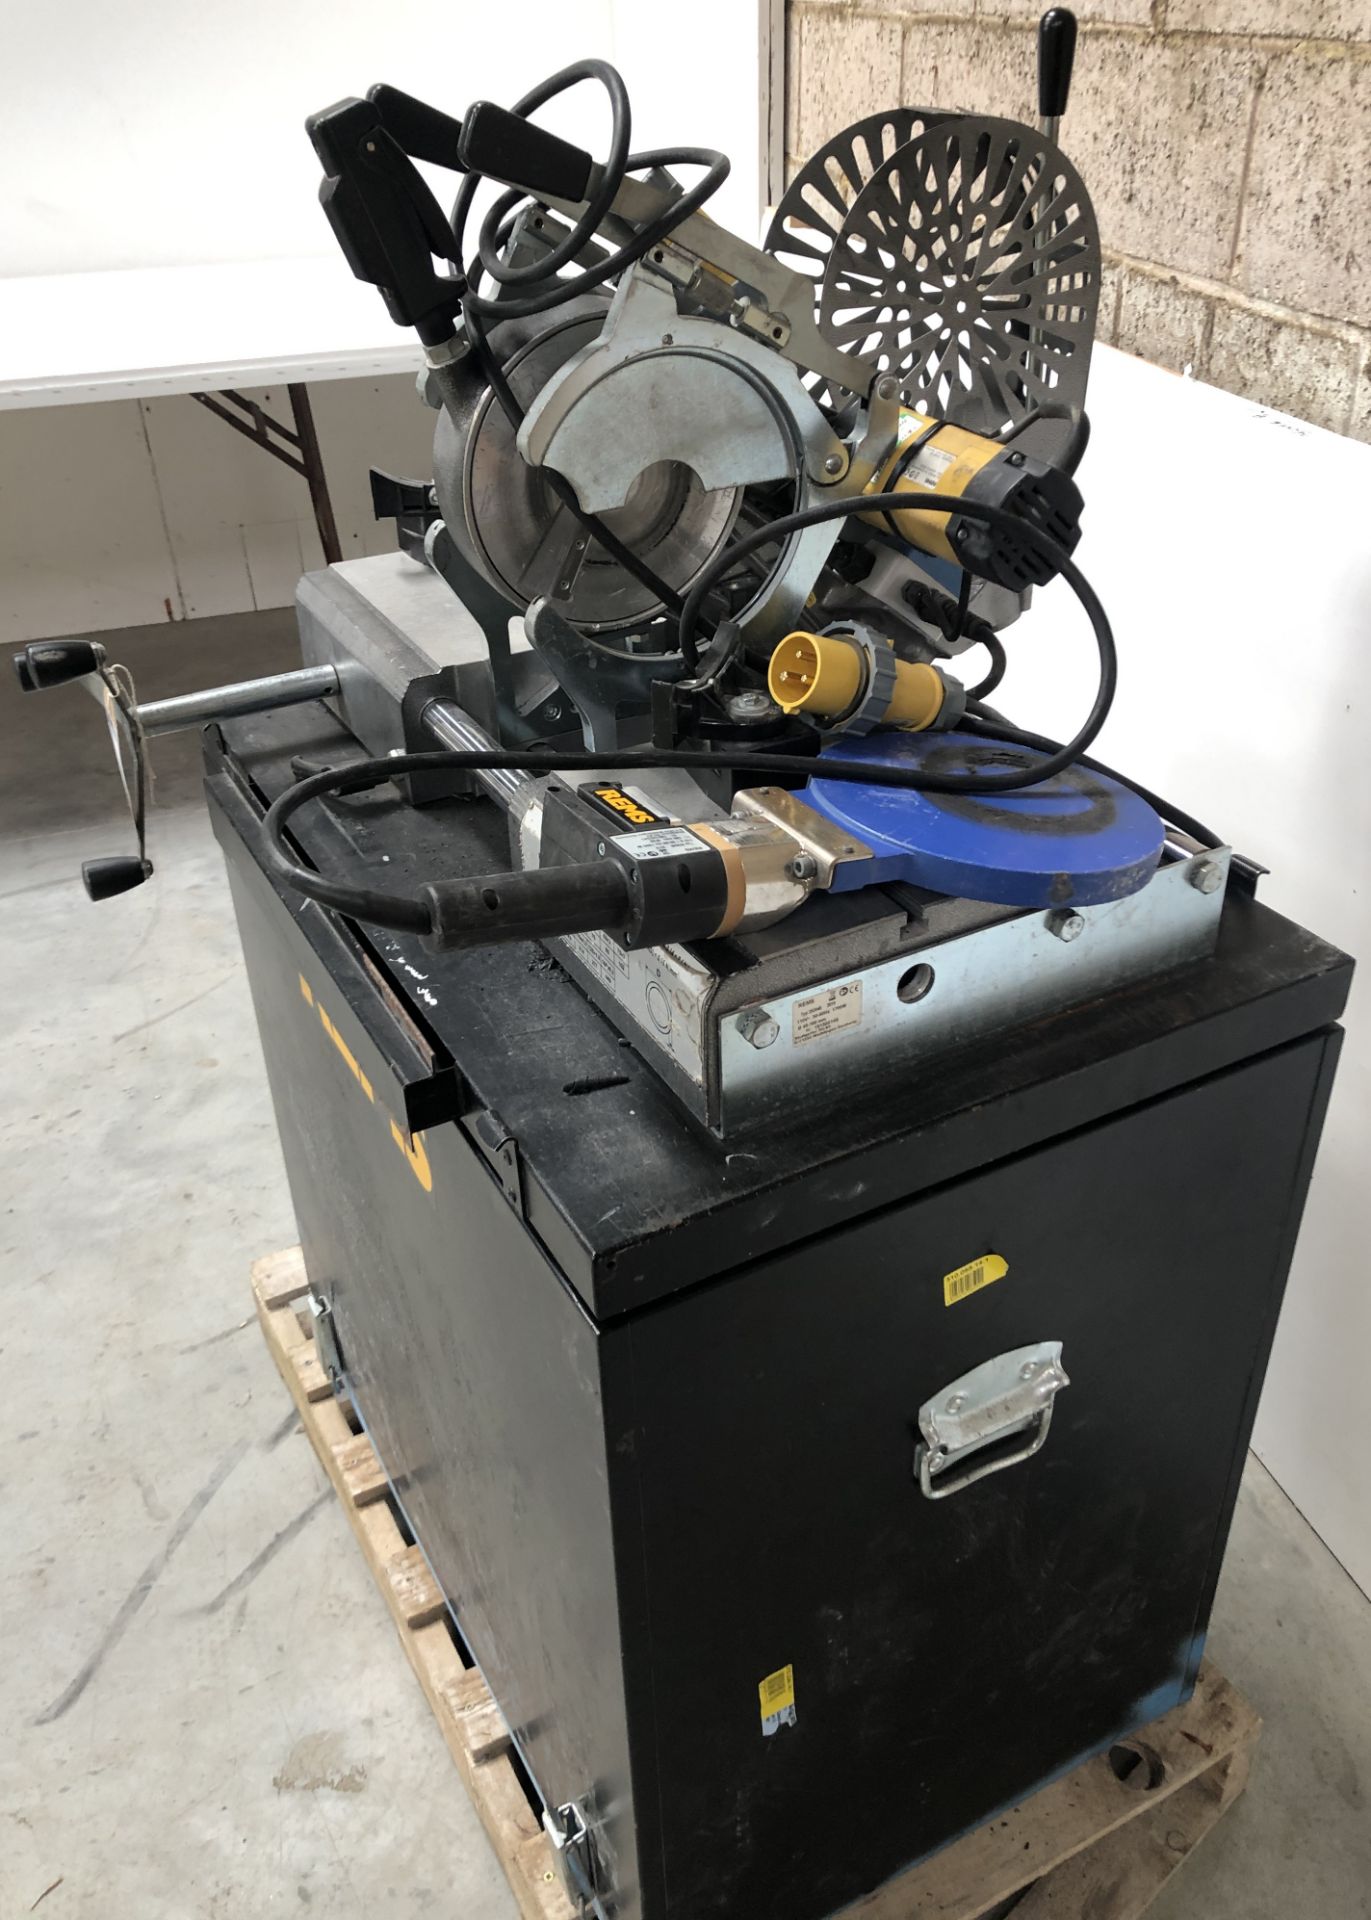 REMS 252046 Plastic Pipe Butt Fusion Welder (2019) Serial Number 191500149 on Cabinet/Stand ( - Image 2 of 4